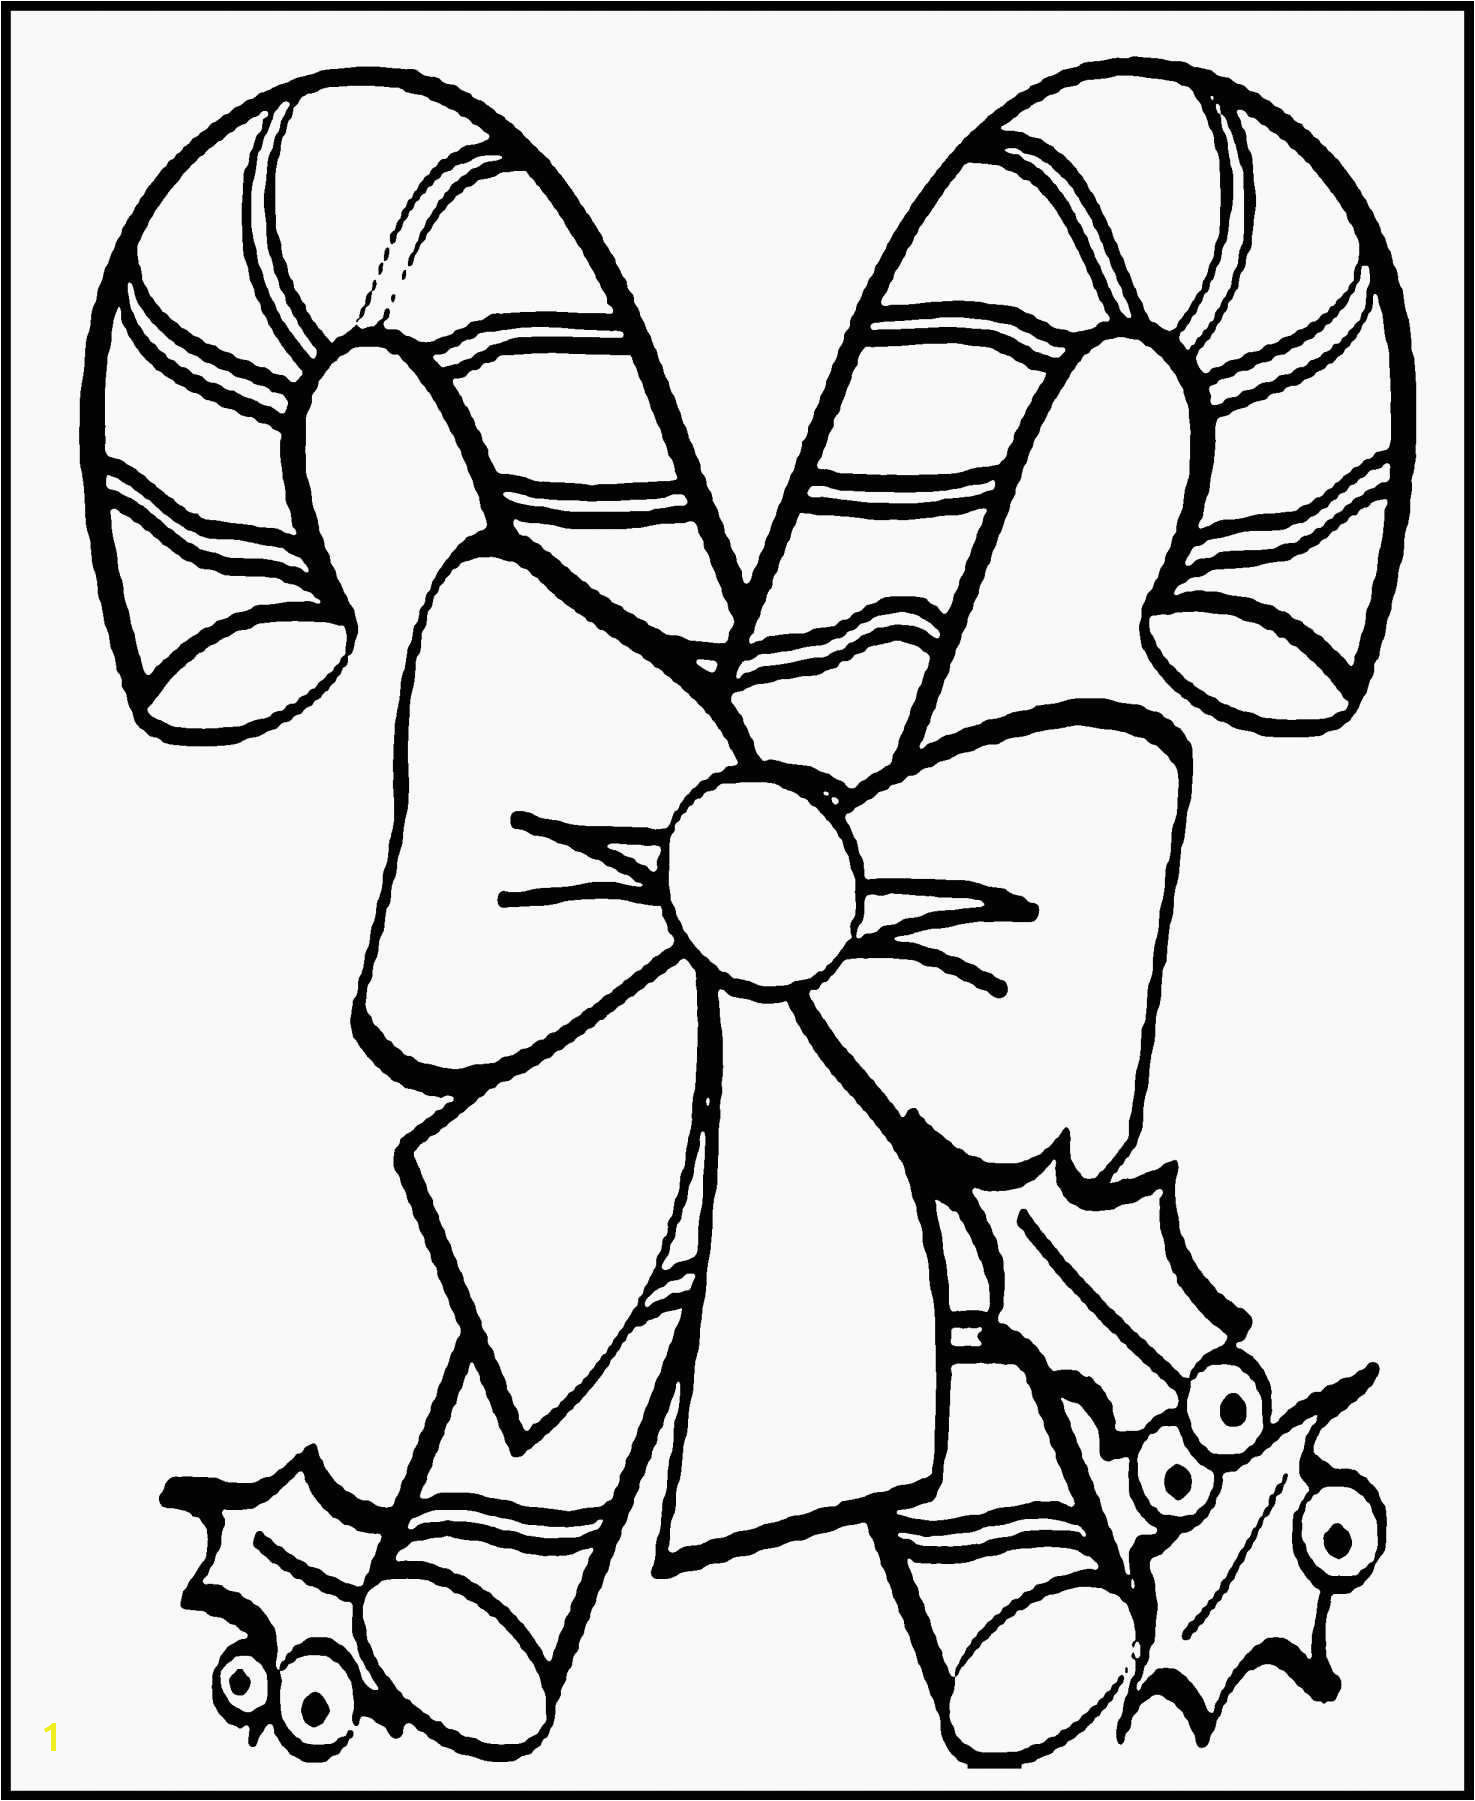 Free Printable Holiday Coloring Pages Holiday Christmas Coloring Pages Free Christmas Coloring Pages Free